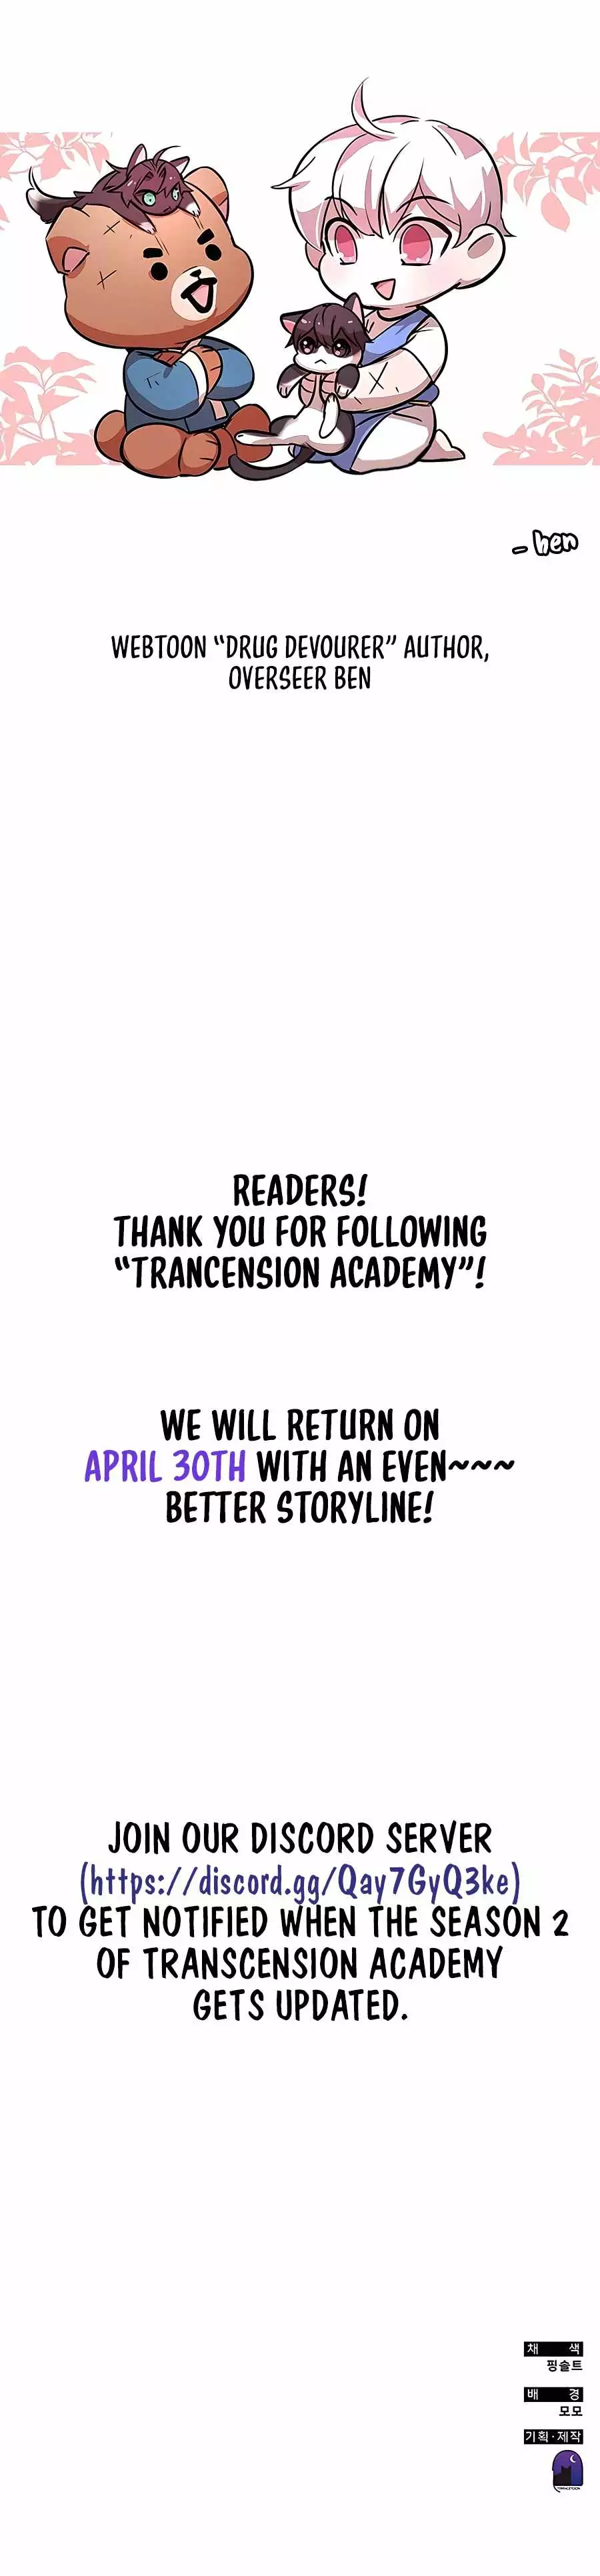 Transcension Academy - 55 page 38-4439199b